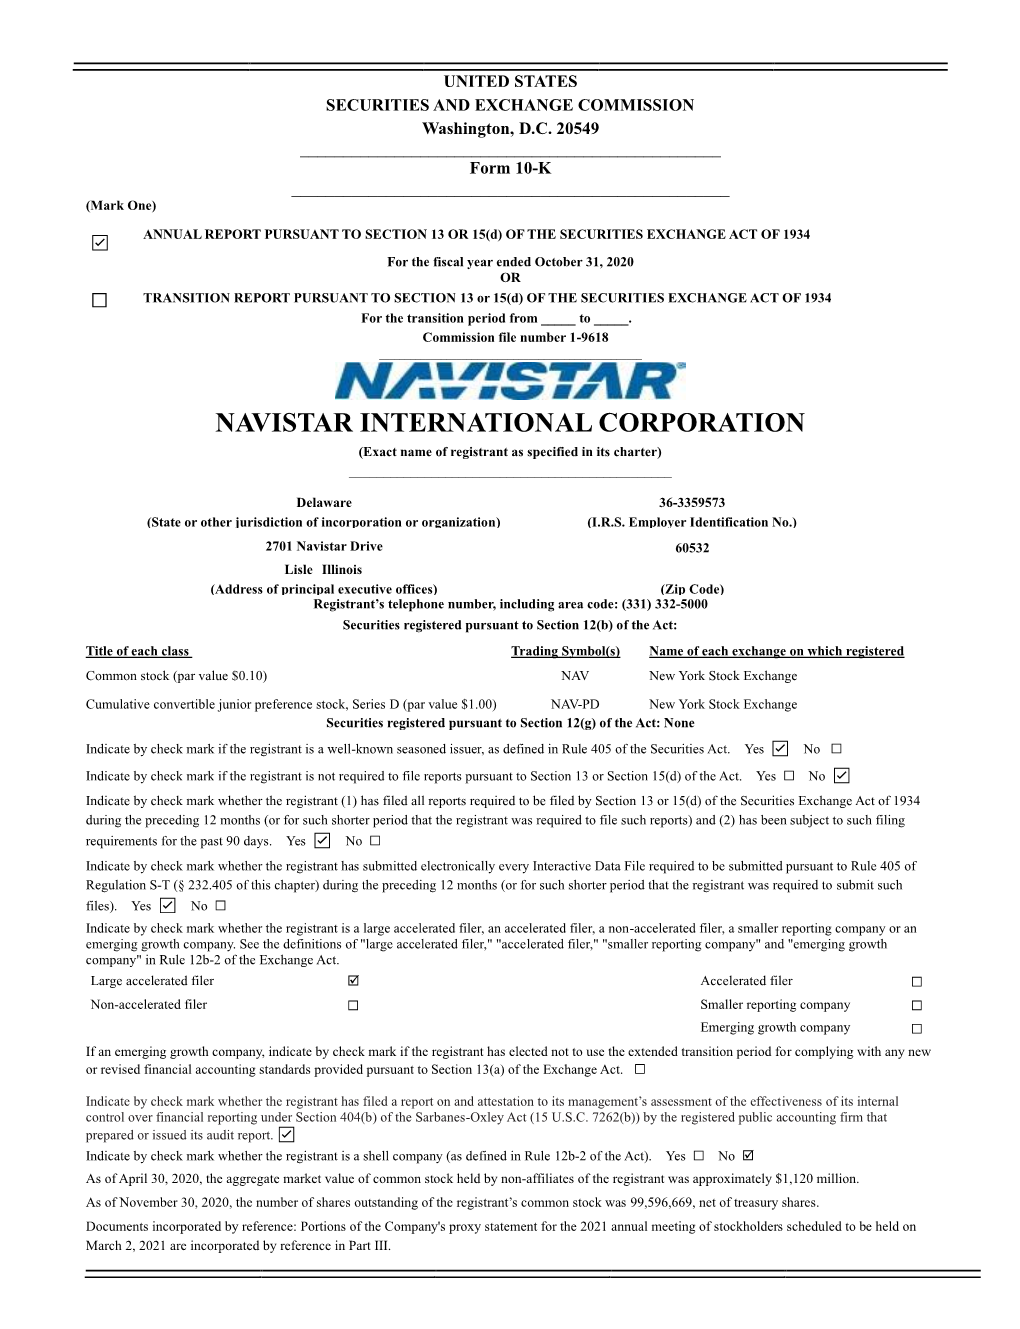 NAVISTAR INTERNATIONAL CORPORATION (Exact Name of Registrant As Specified in Its Charter) ______